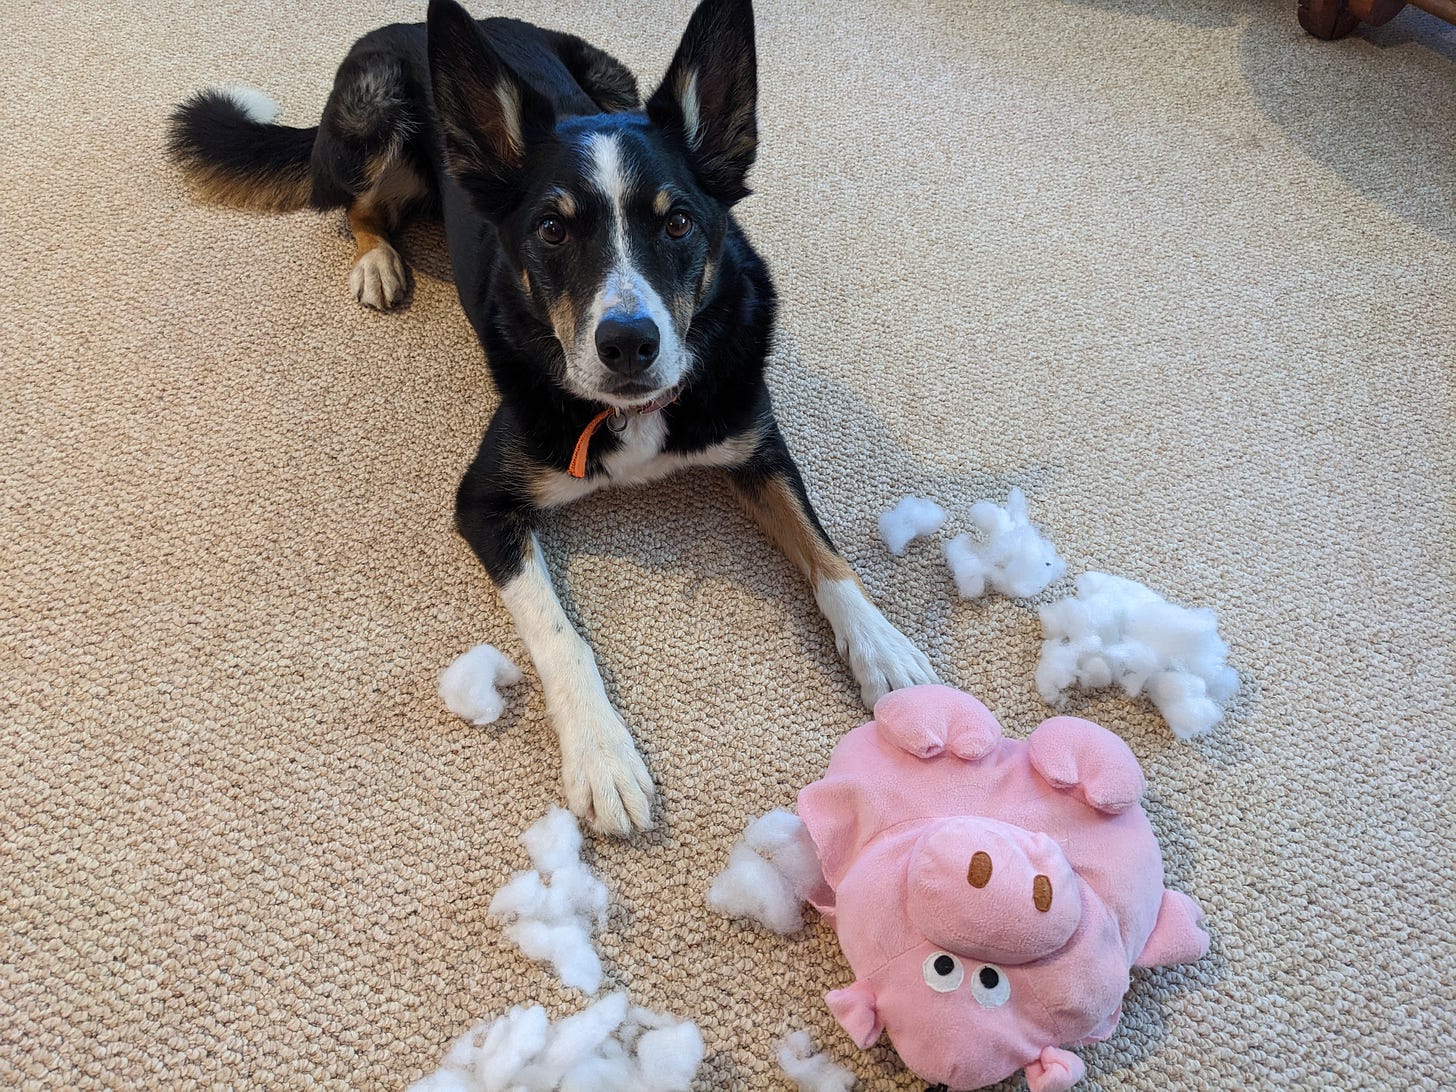 Dog with destroyed toy